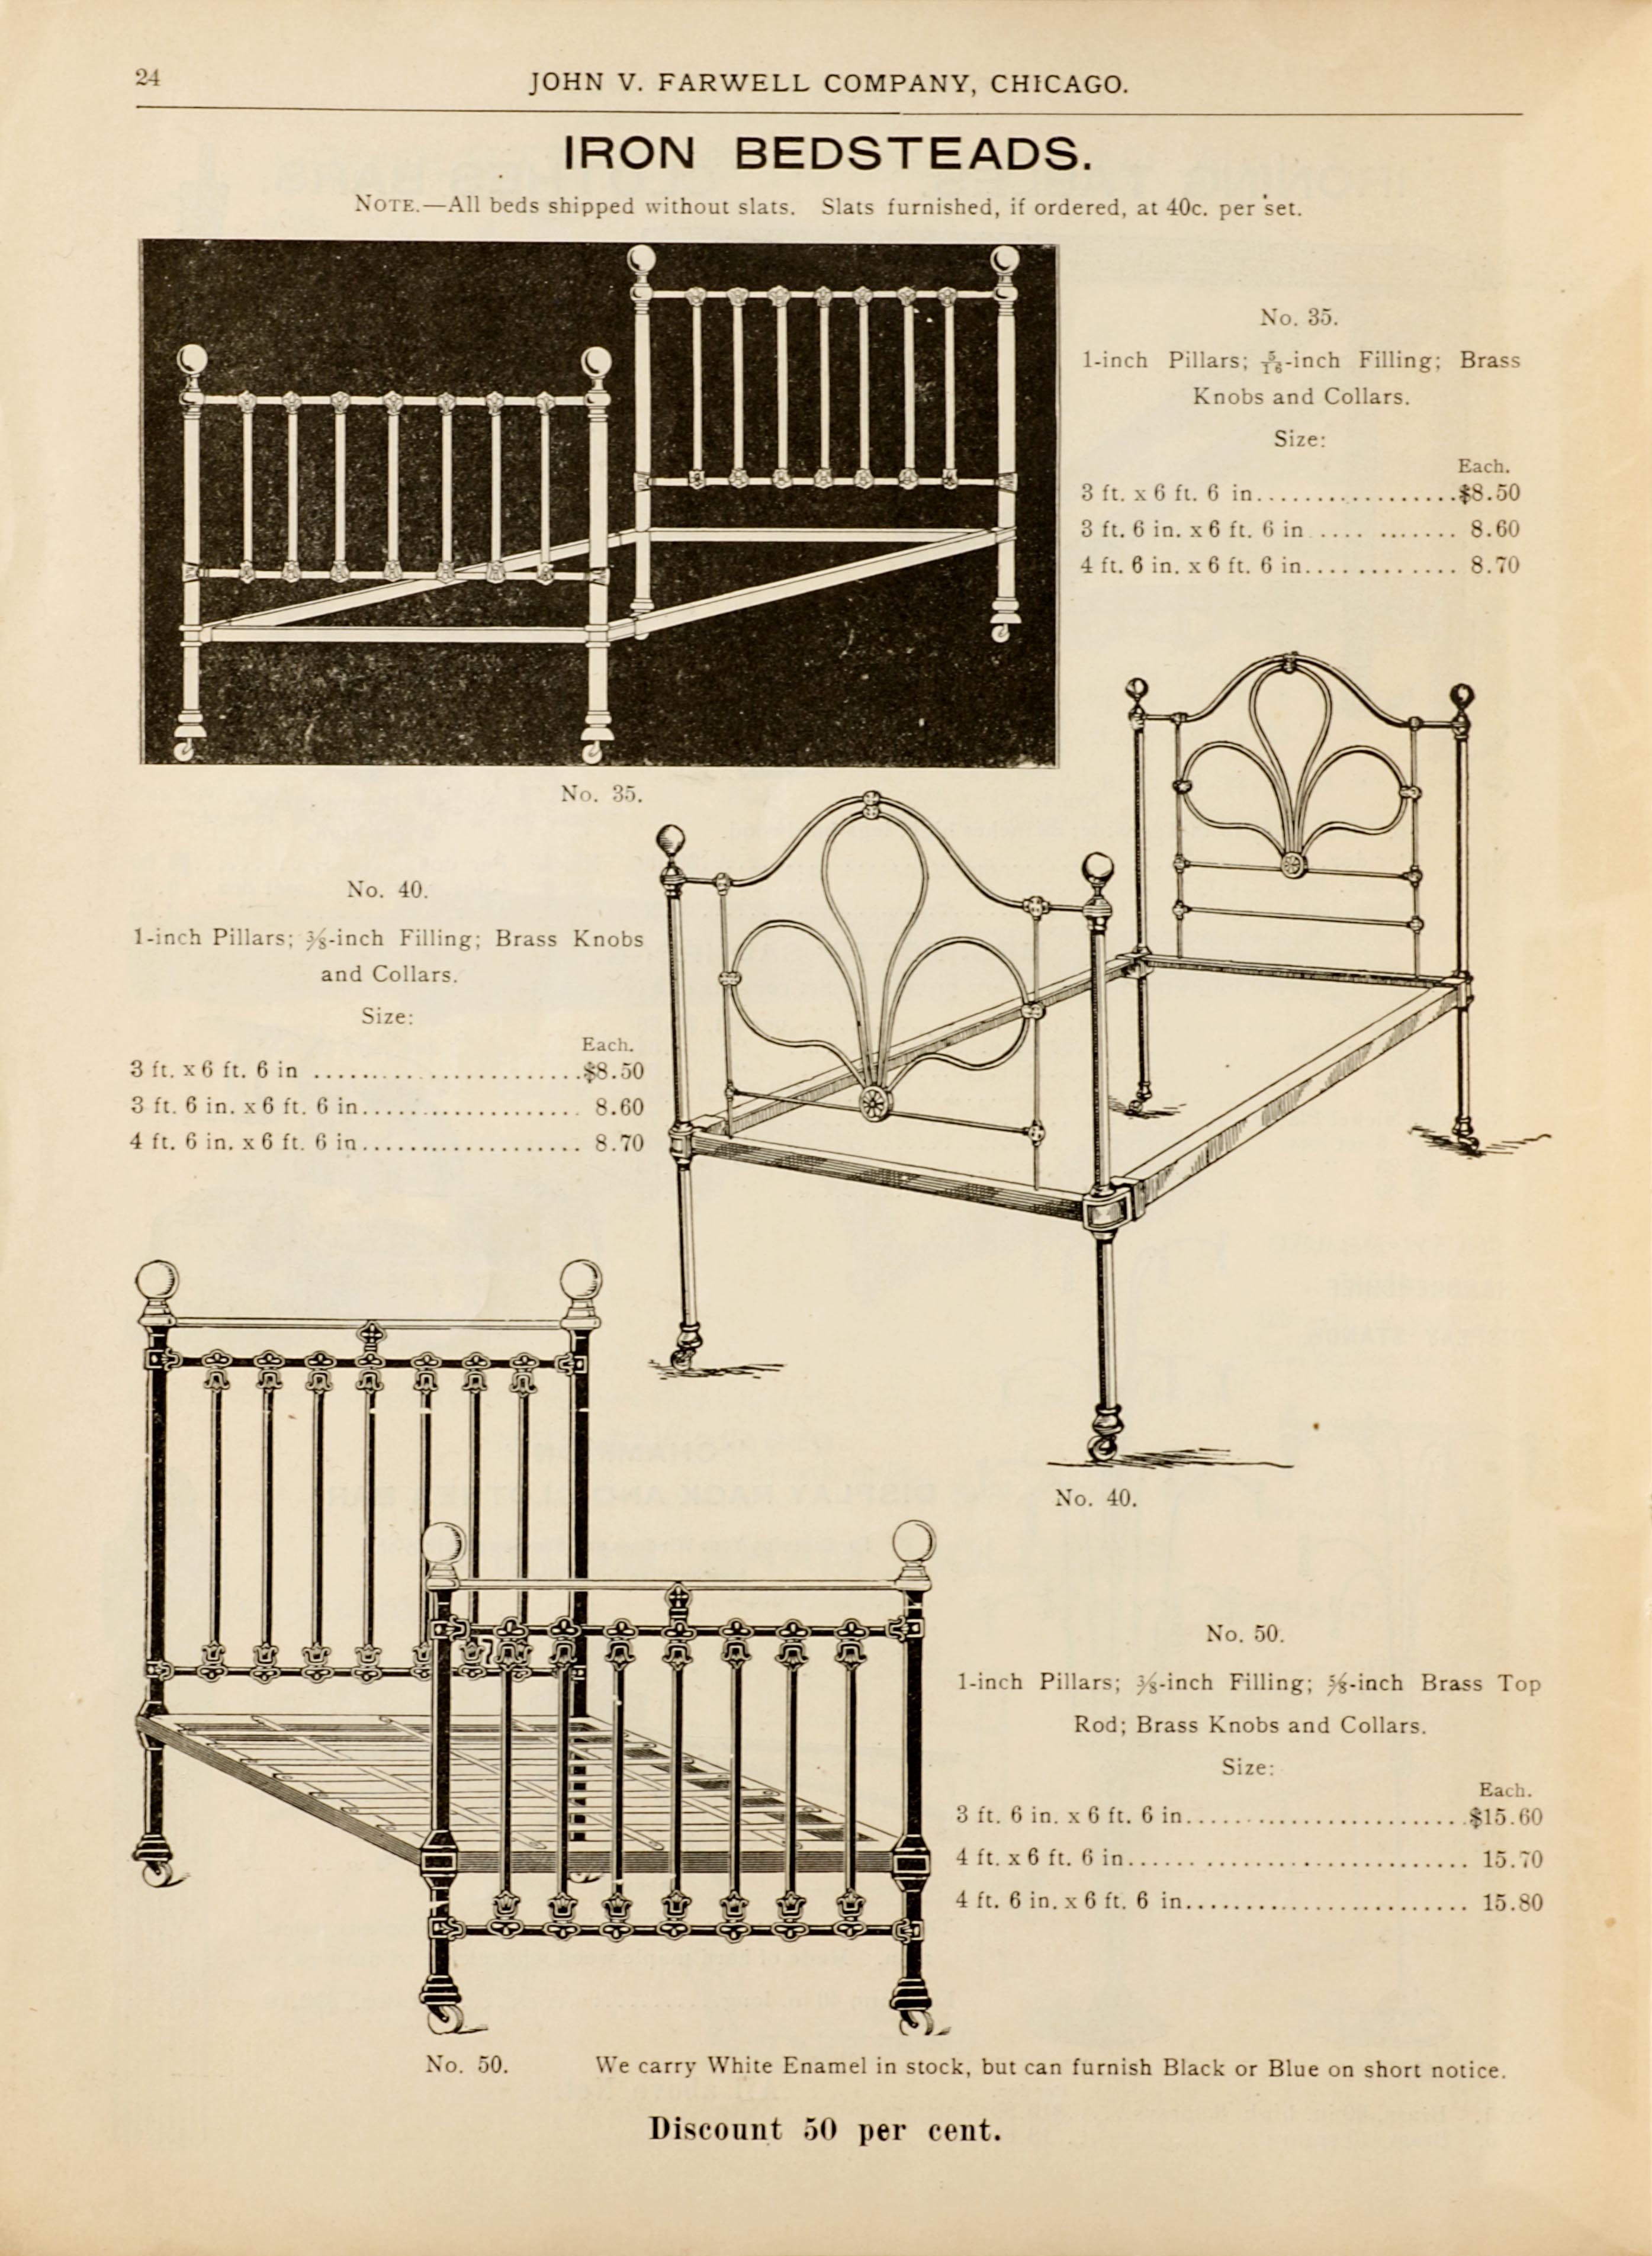 John V. Farwell Iron Bed Catalog, Chicago 1895- Page 16